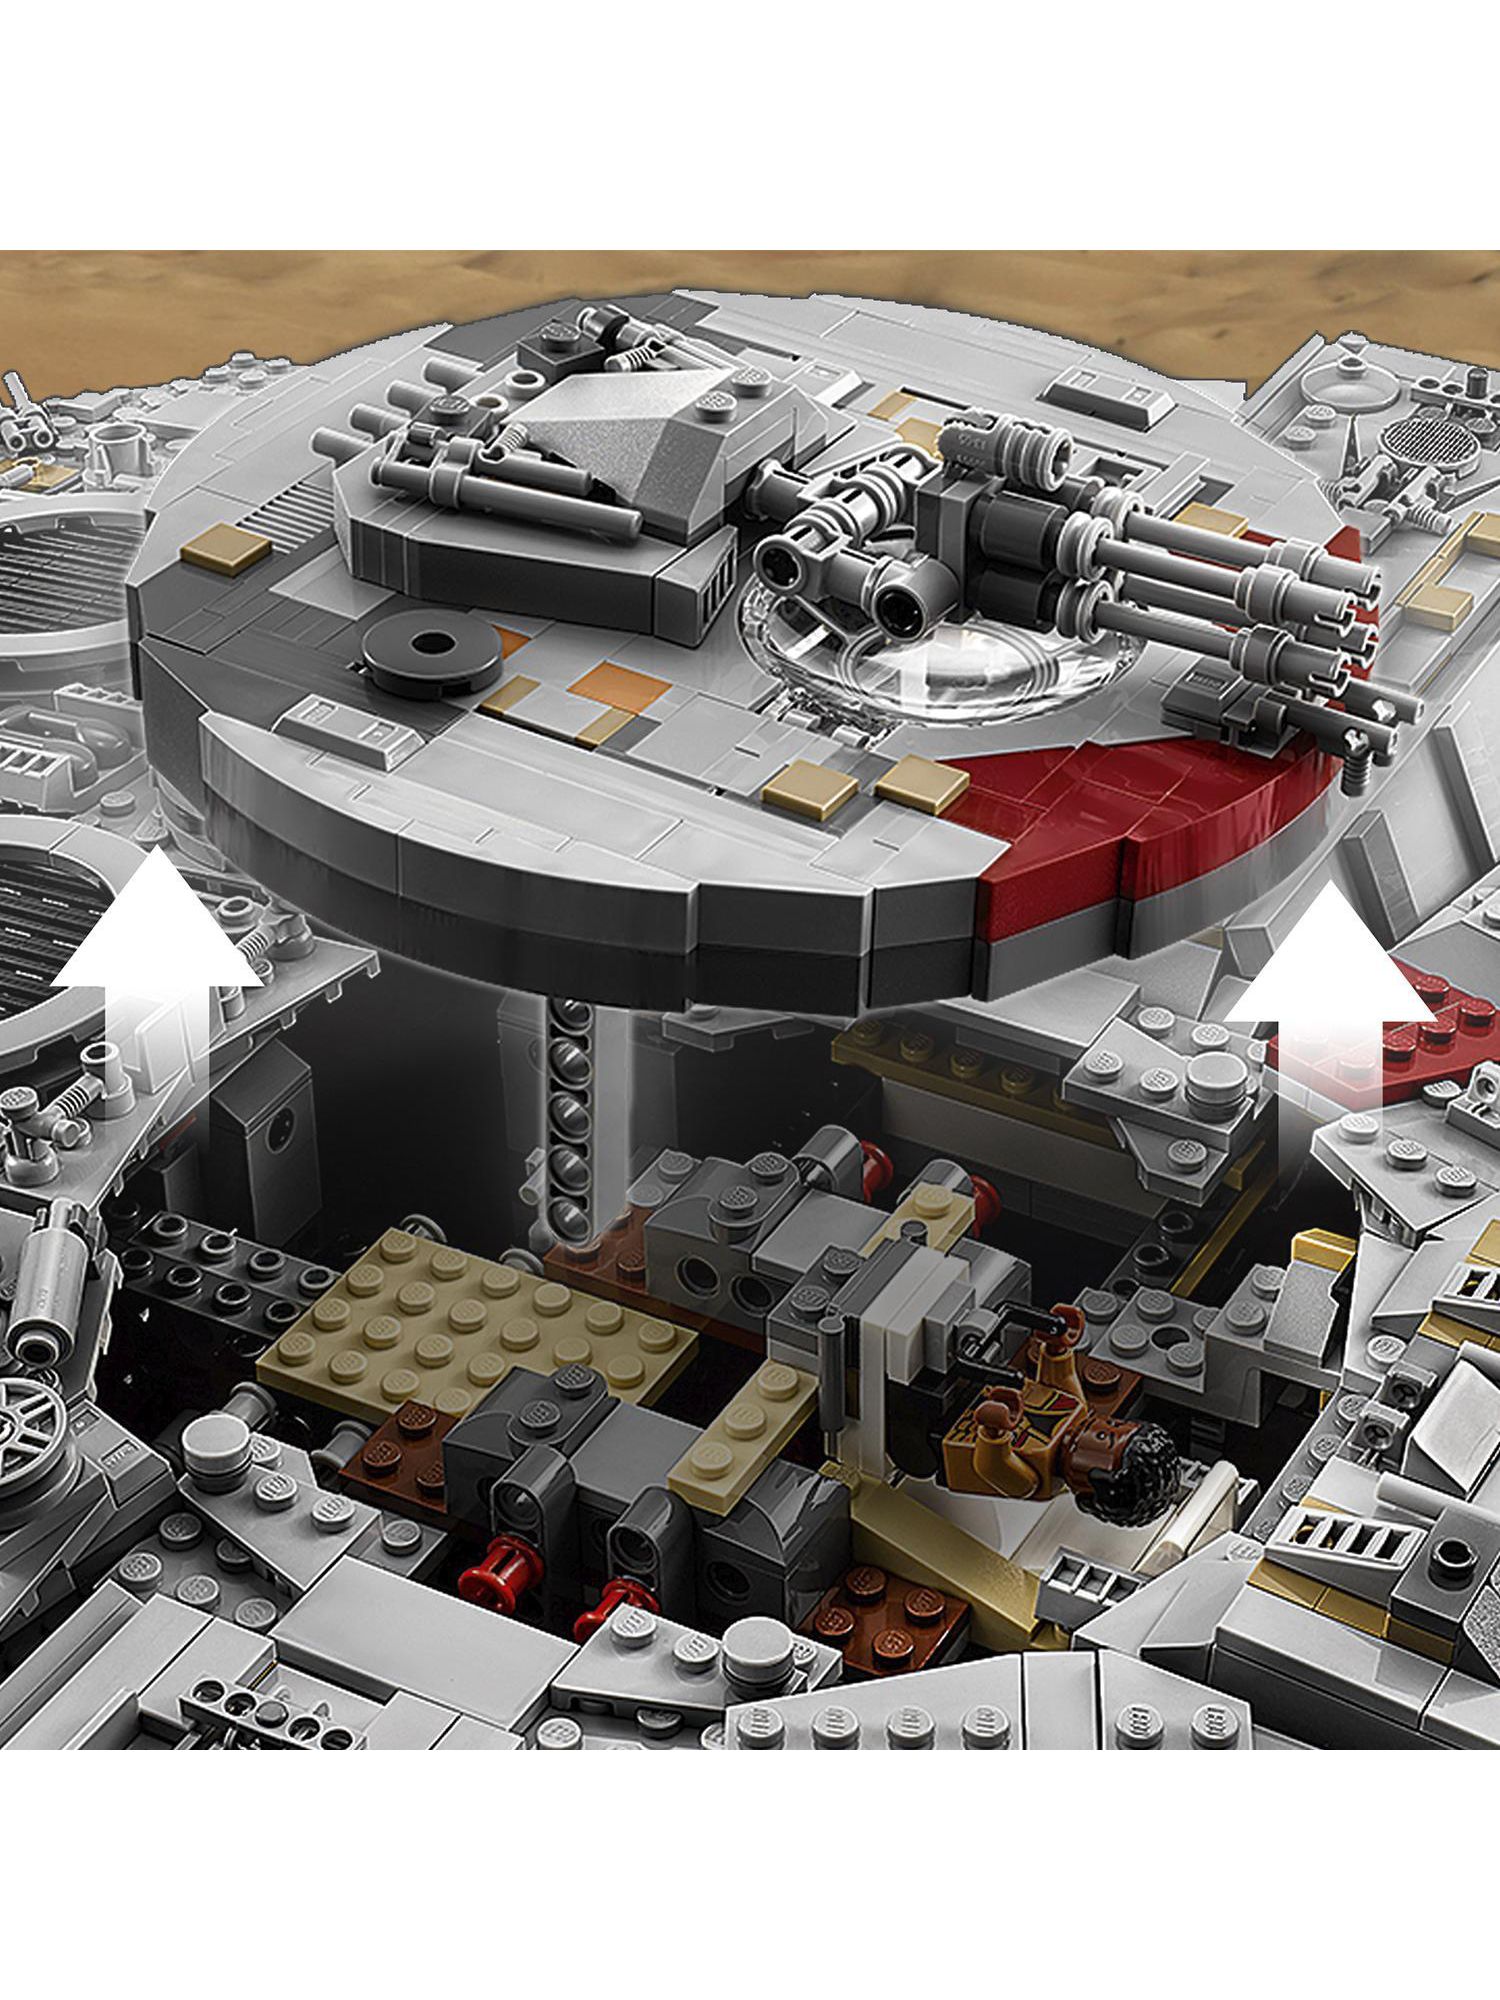 How the Millennium Falcon became the biggest LEGO set ever